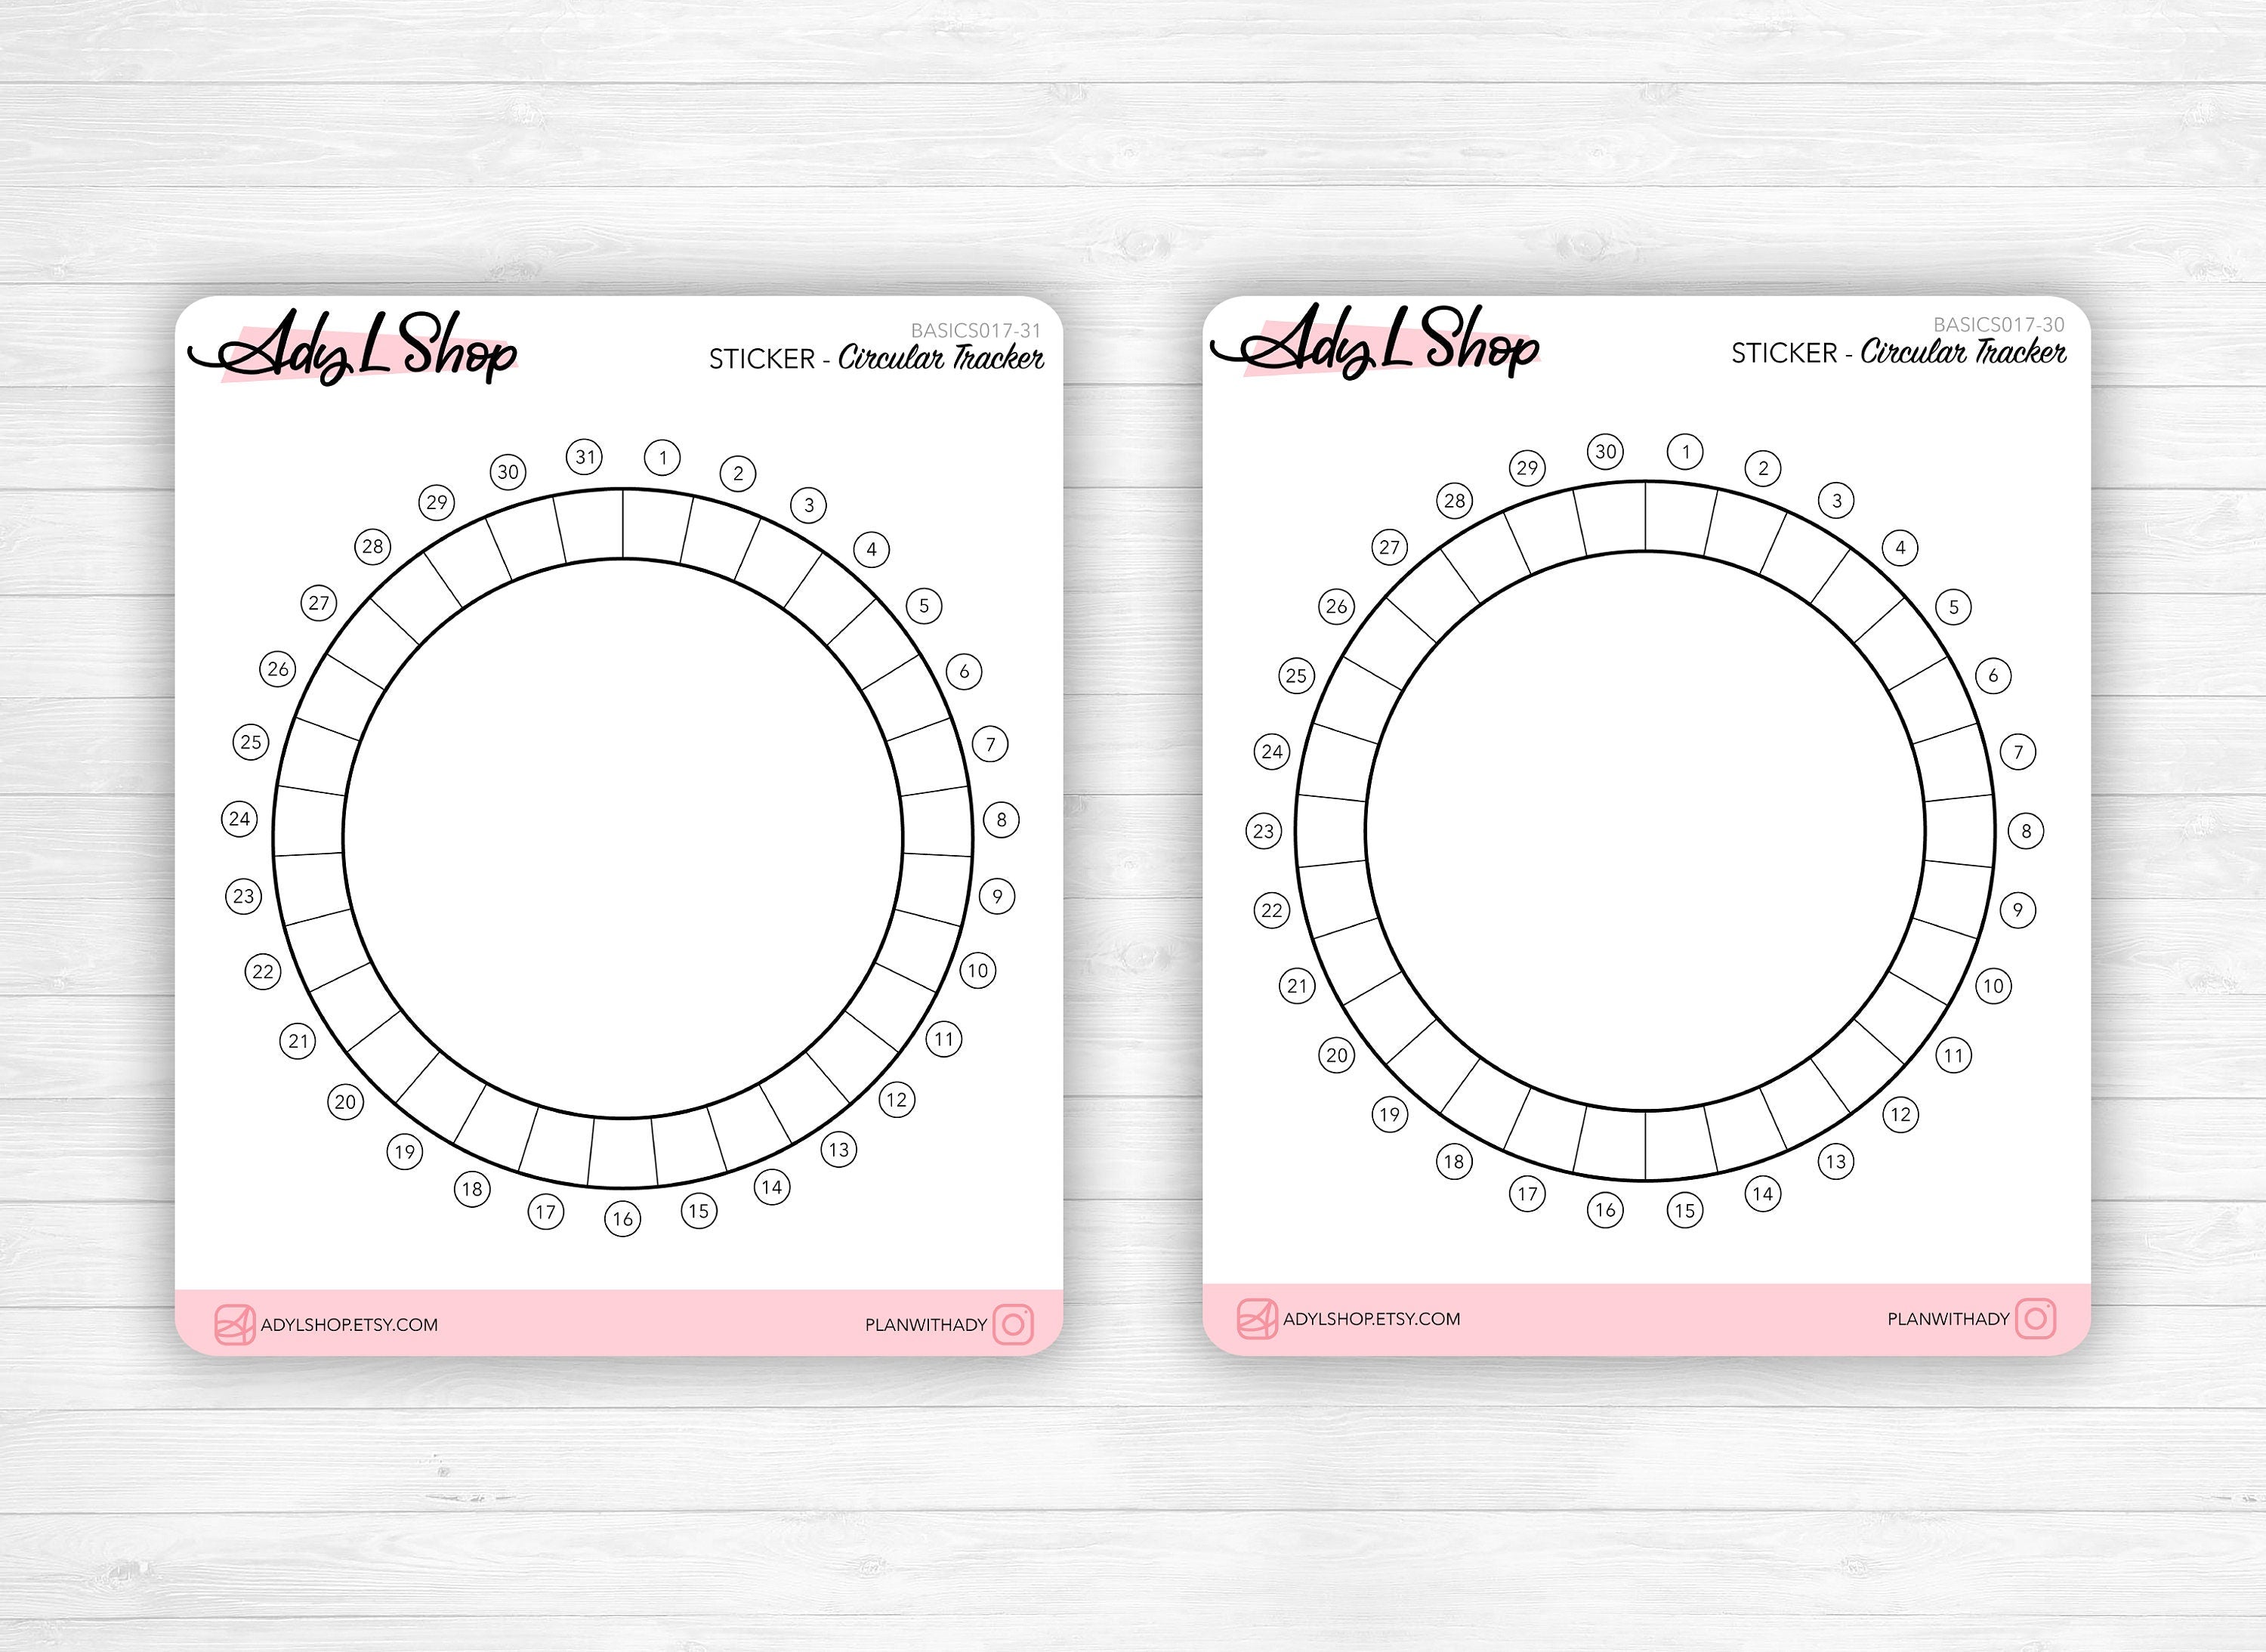  A5 Circle Mood Tracker Stickers in Pink - 120 Pieces 5.3 x  8.3 - Craft Journal Snail Mail Planner Journal Diary Paper Sticker Sheet :  Office Products